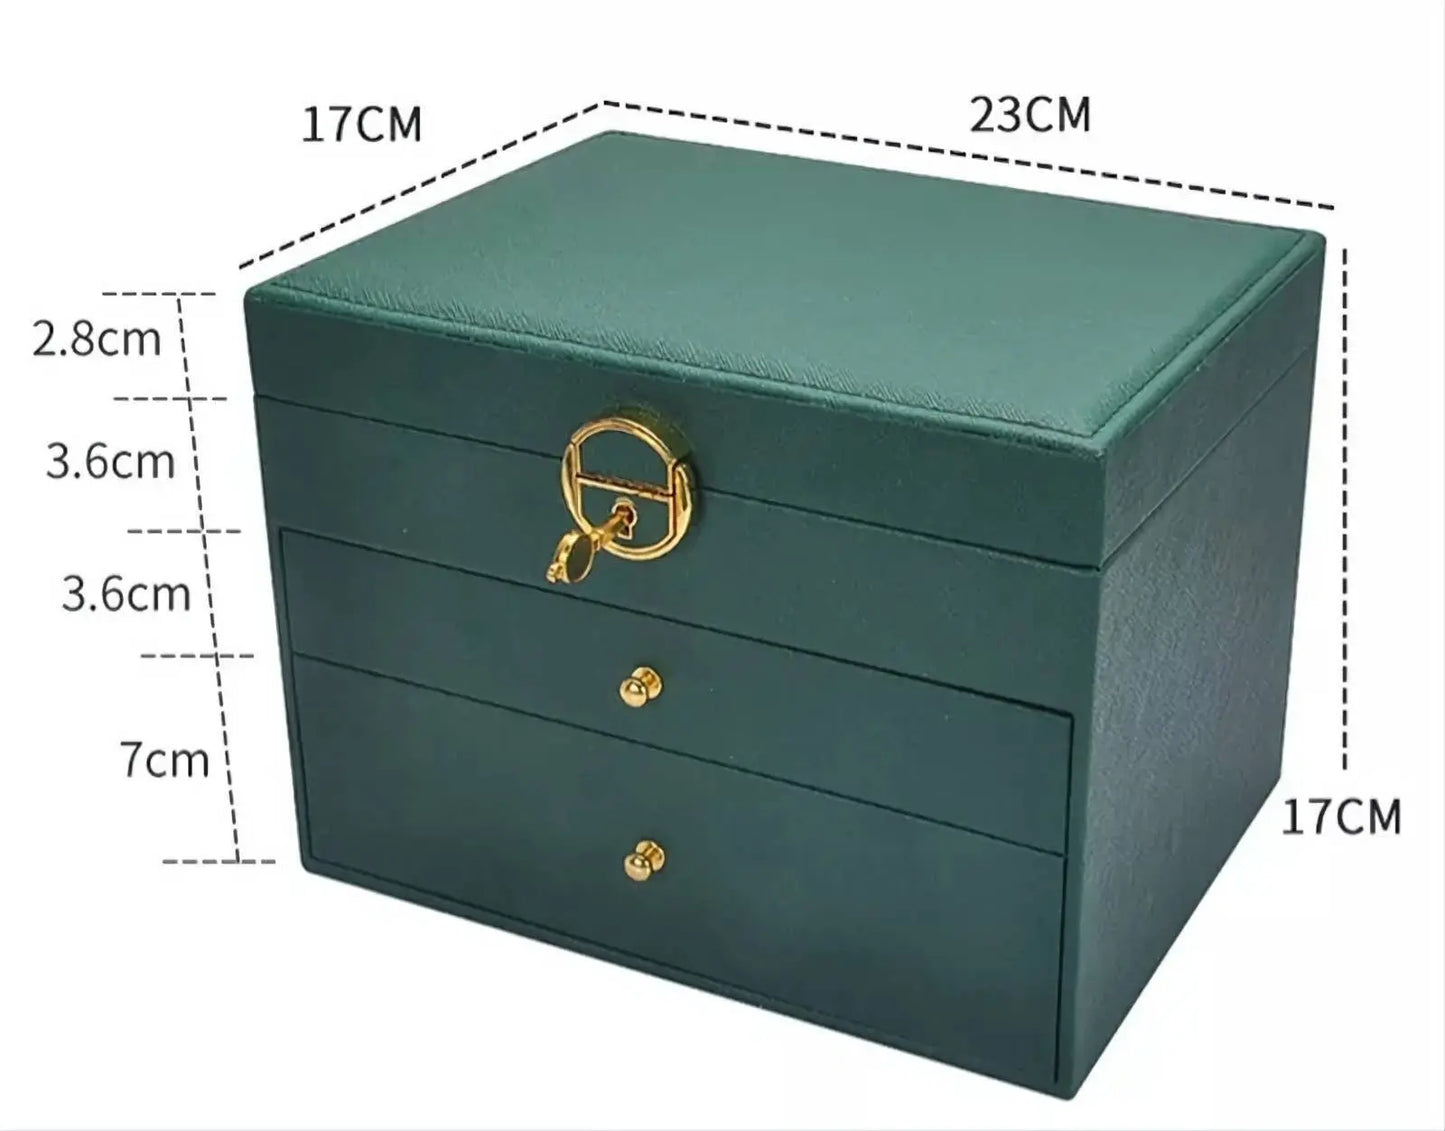 Large Jewelry box for Woman Layer Large Jewelry Storage Case, PU Leather Jewellery Organizer Holder with Lock Removable Ring and Earring JettsJewelers